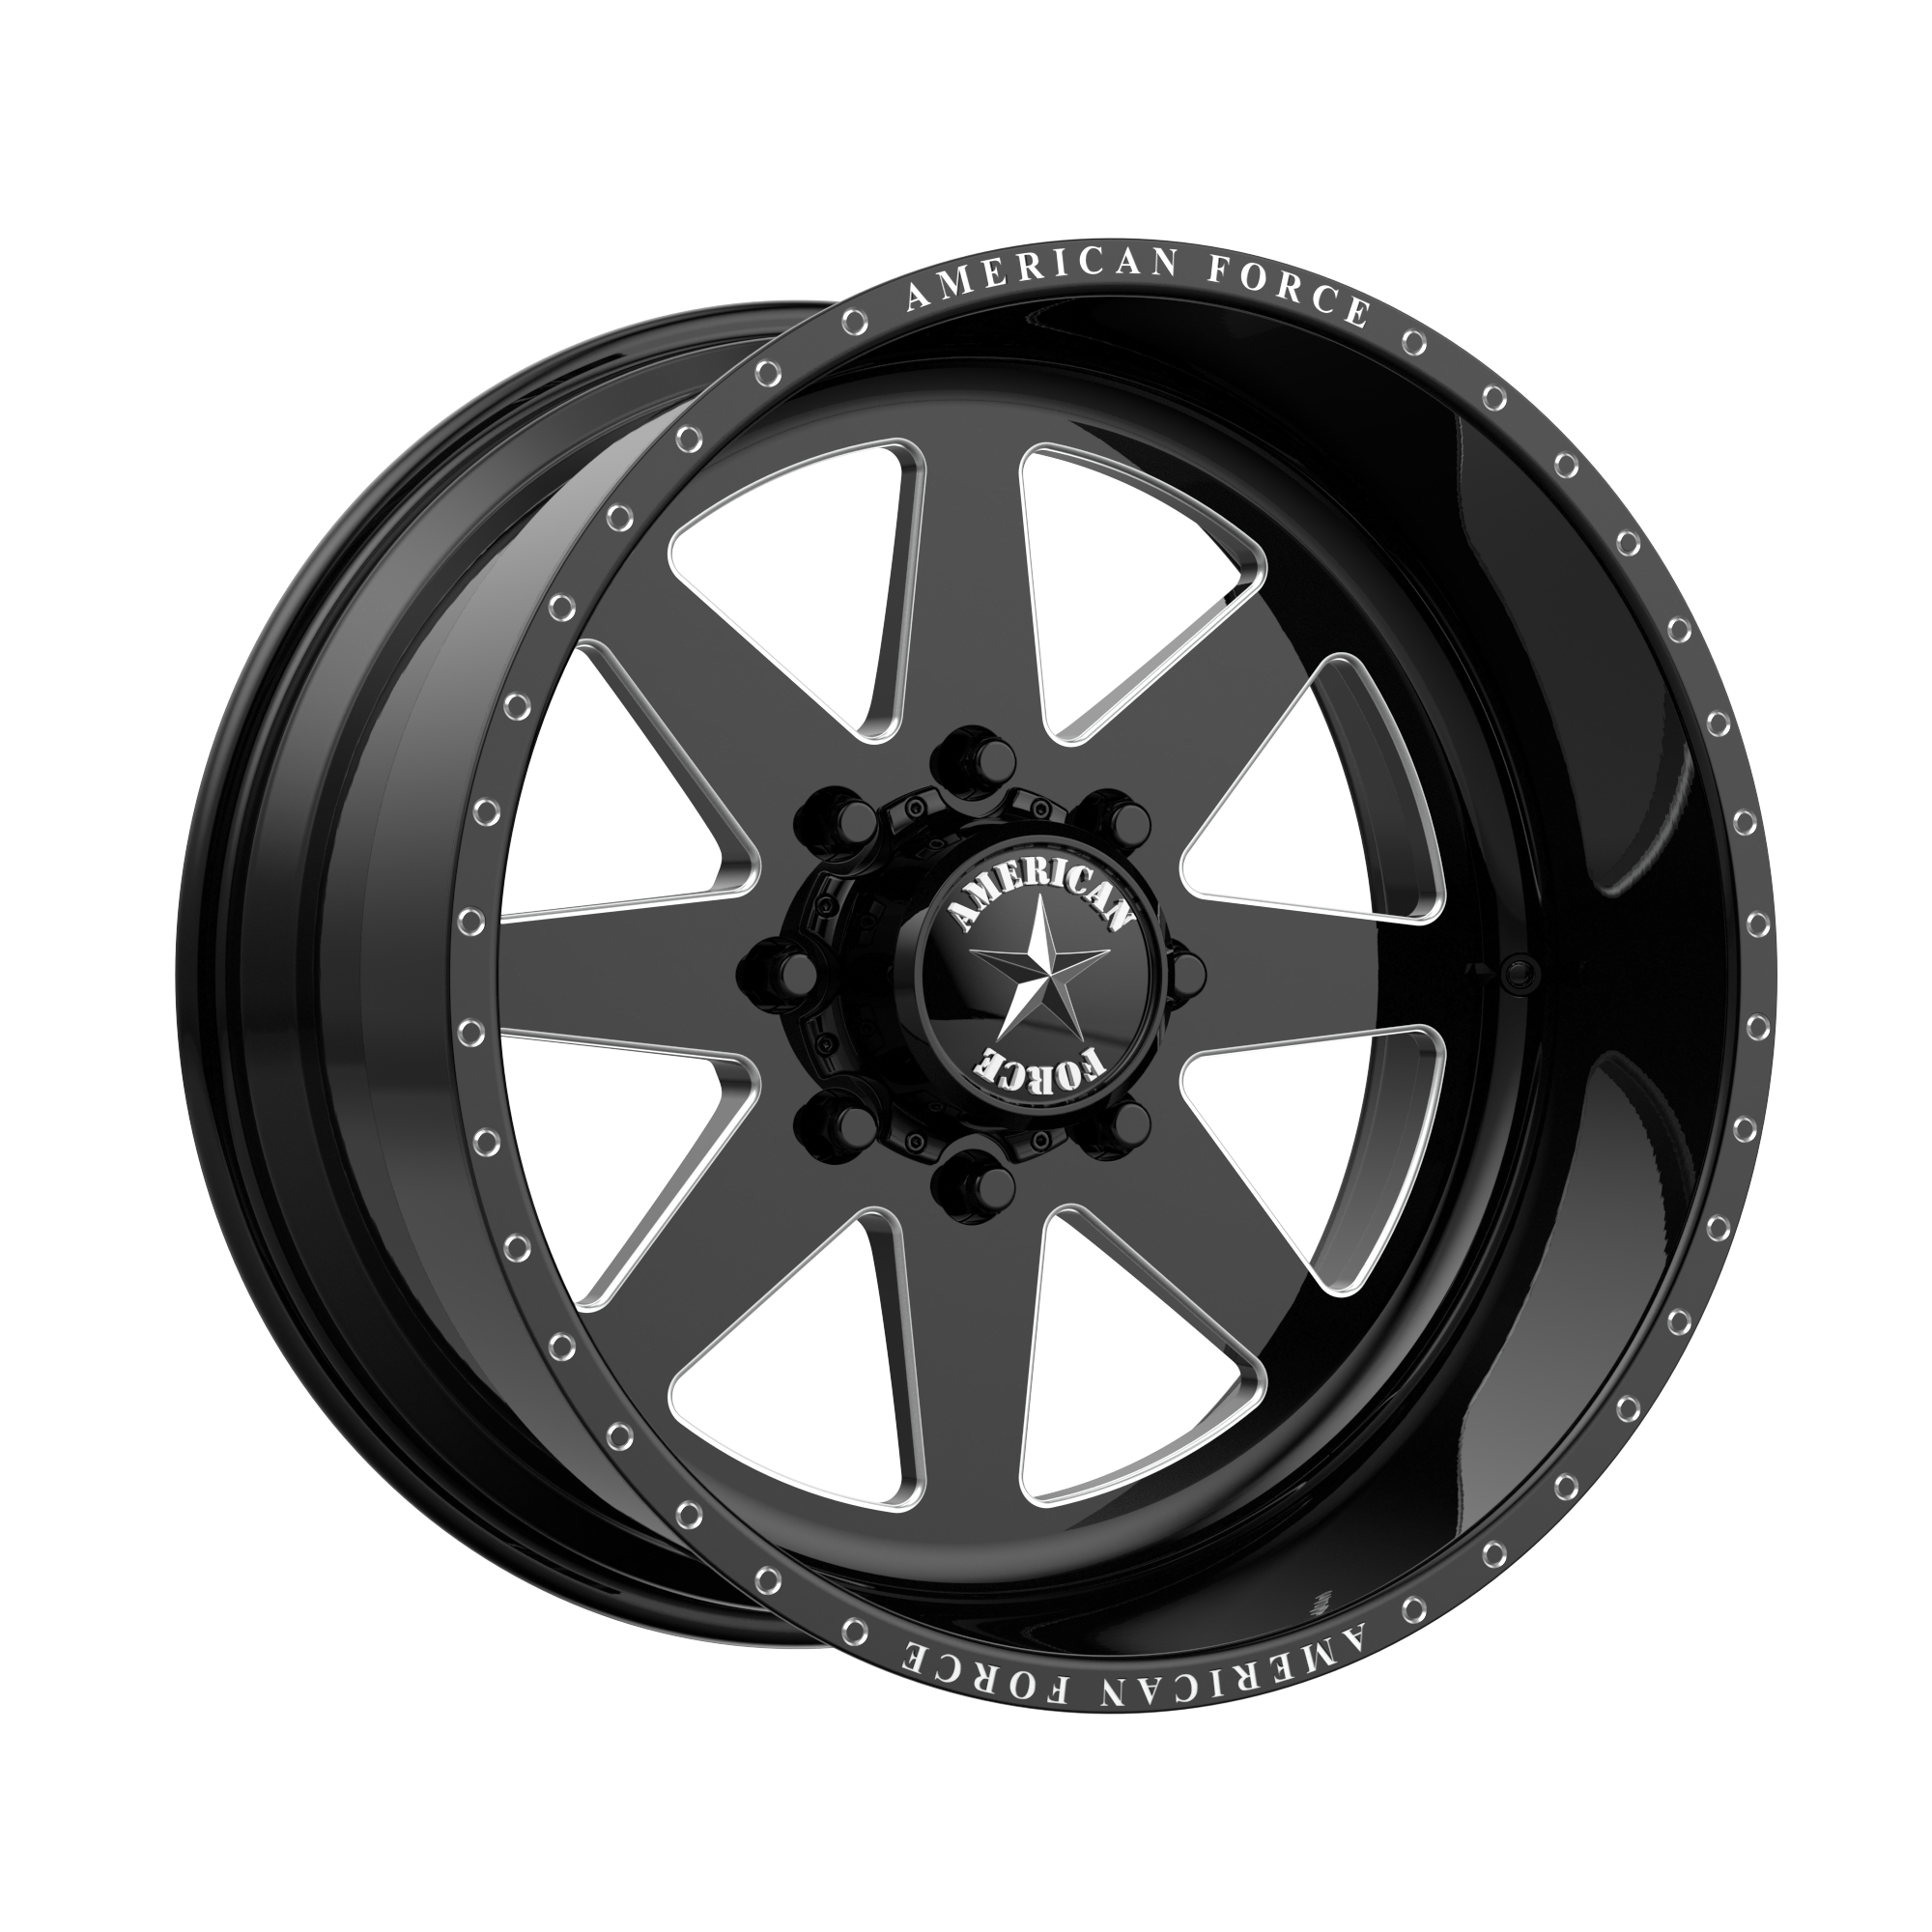 INDEPENDENCE SS 20x12 6x135.00 GLOSS BLACK MACHINED (-40 mm) - Tires and Engine Performance